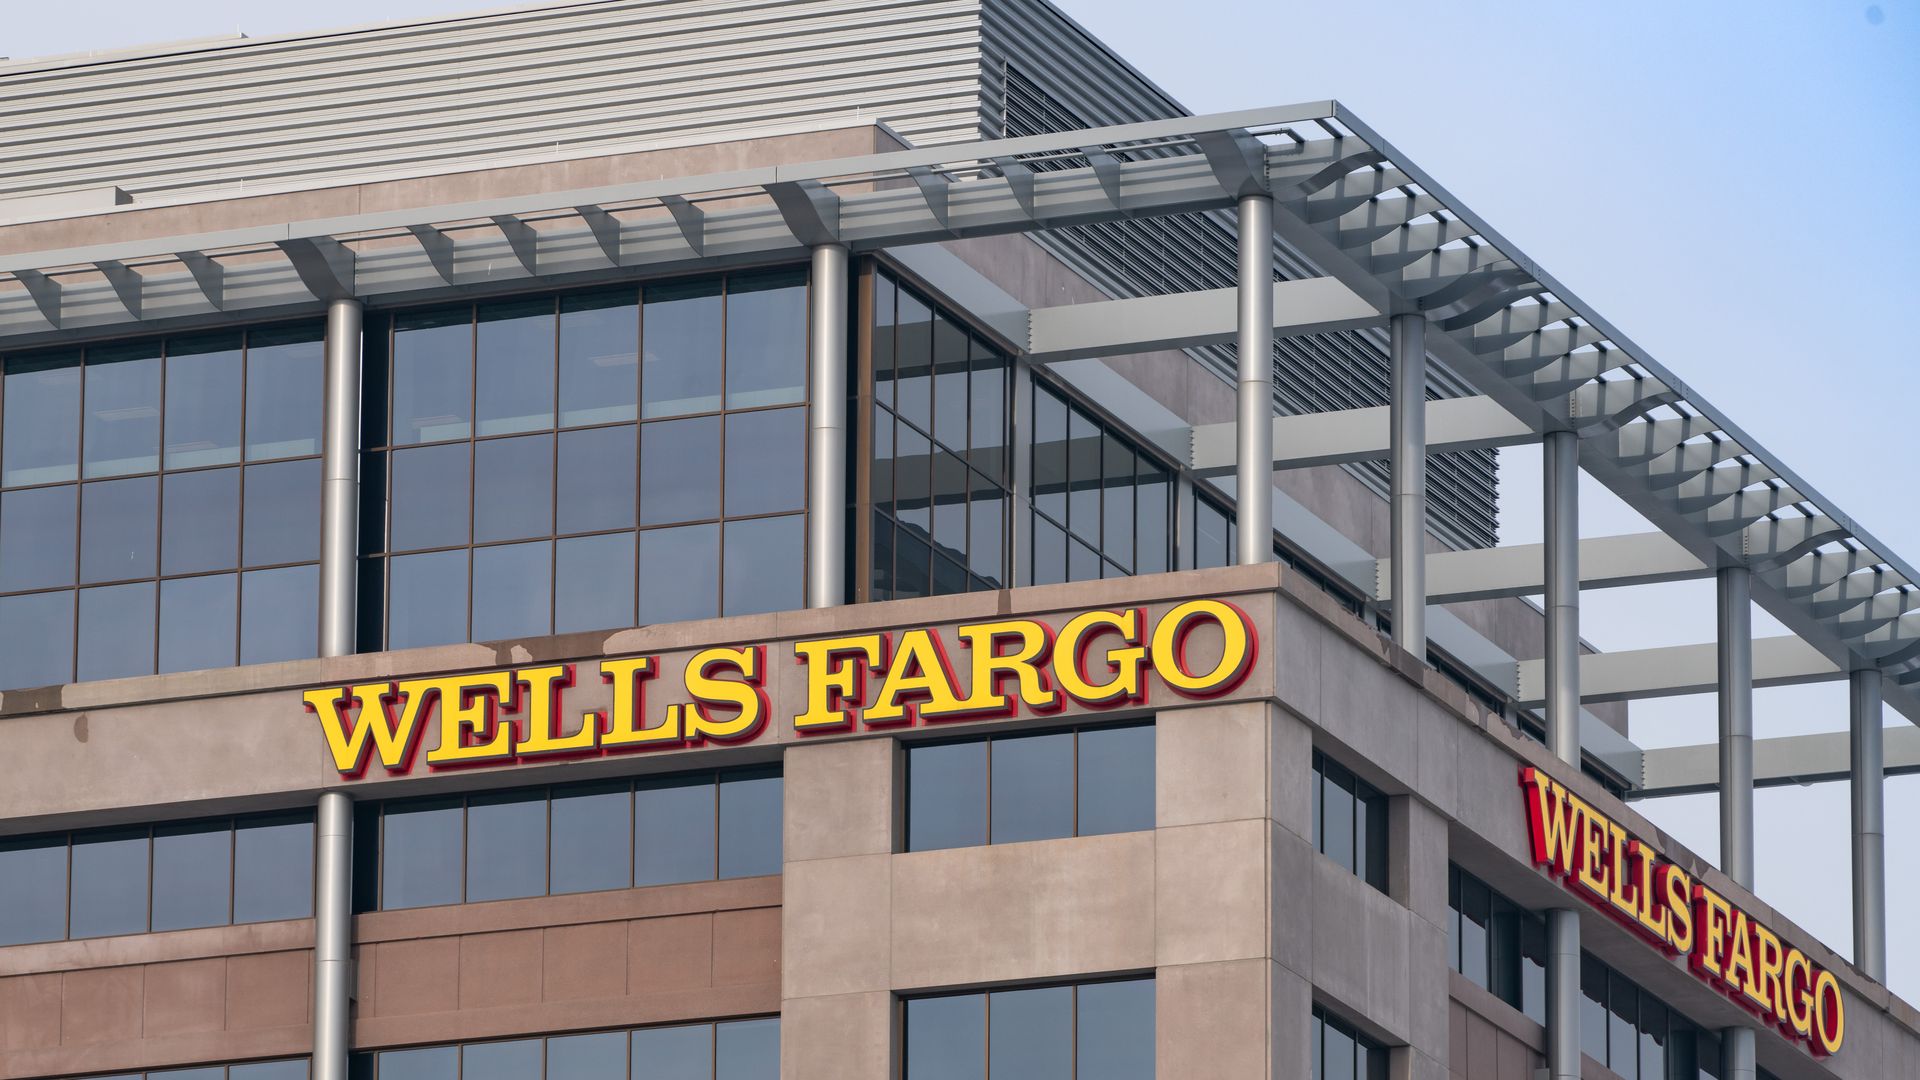 wells fargo tower with signeage